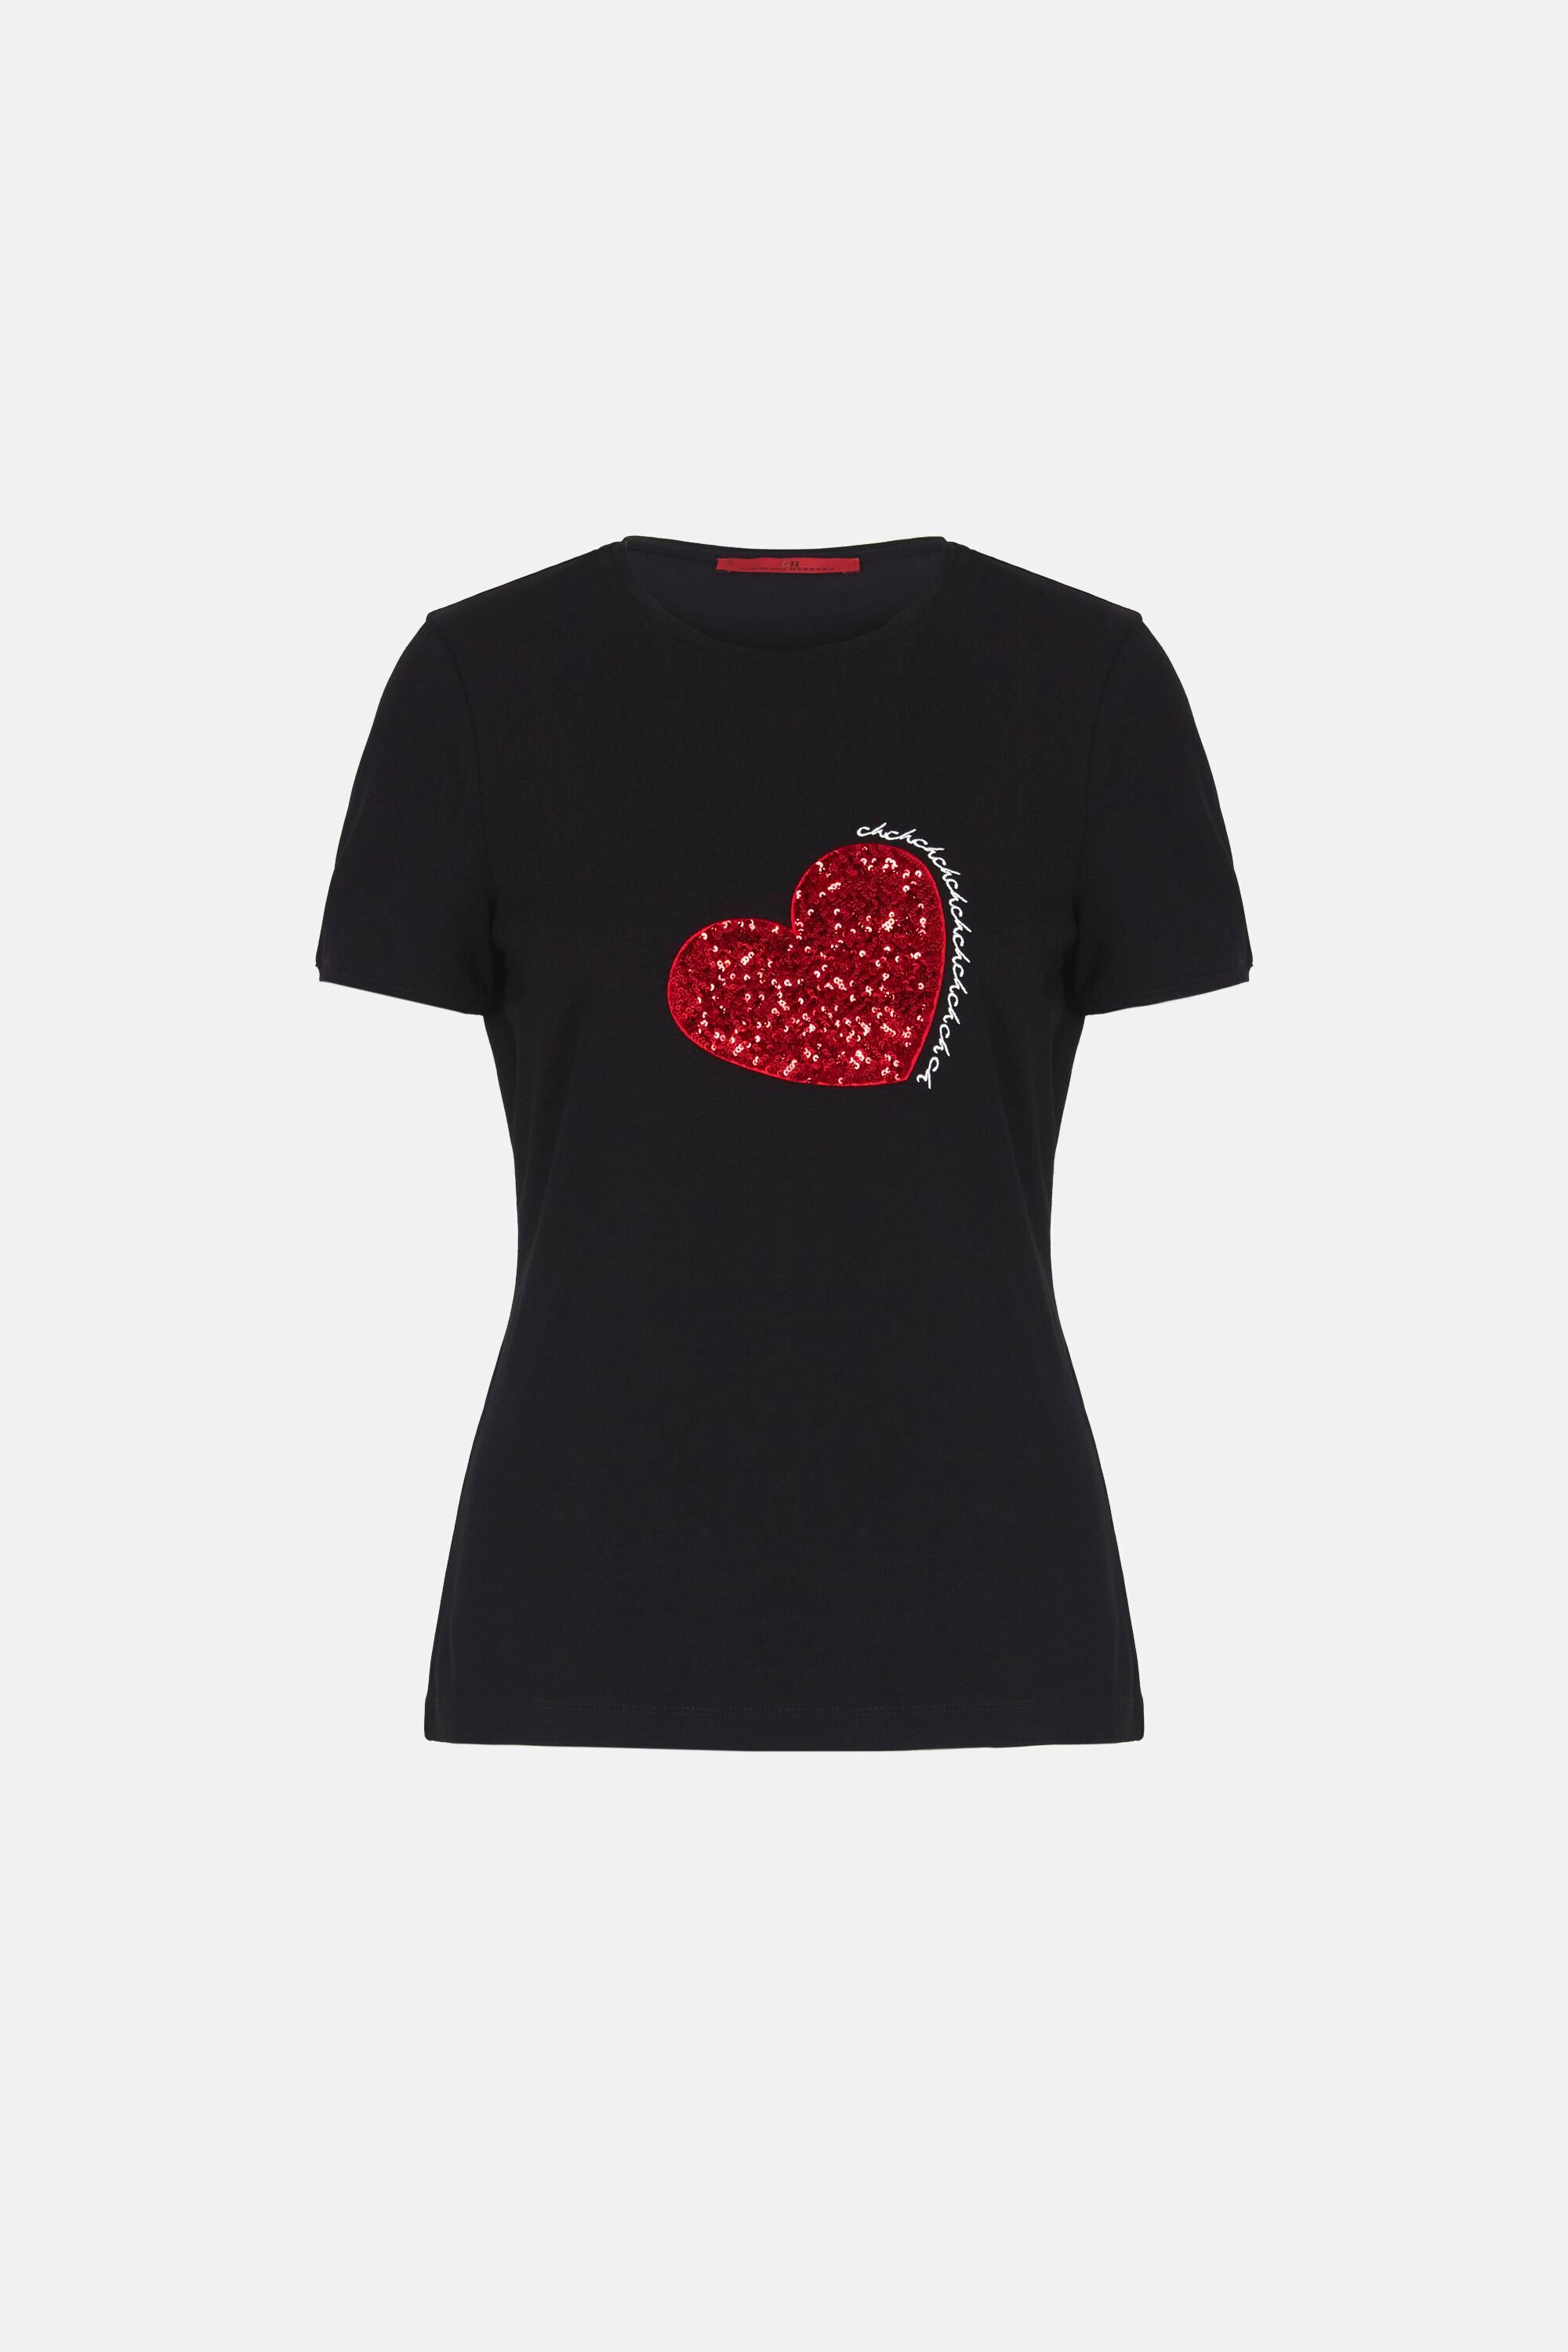 CH t-shirt with heart